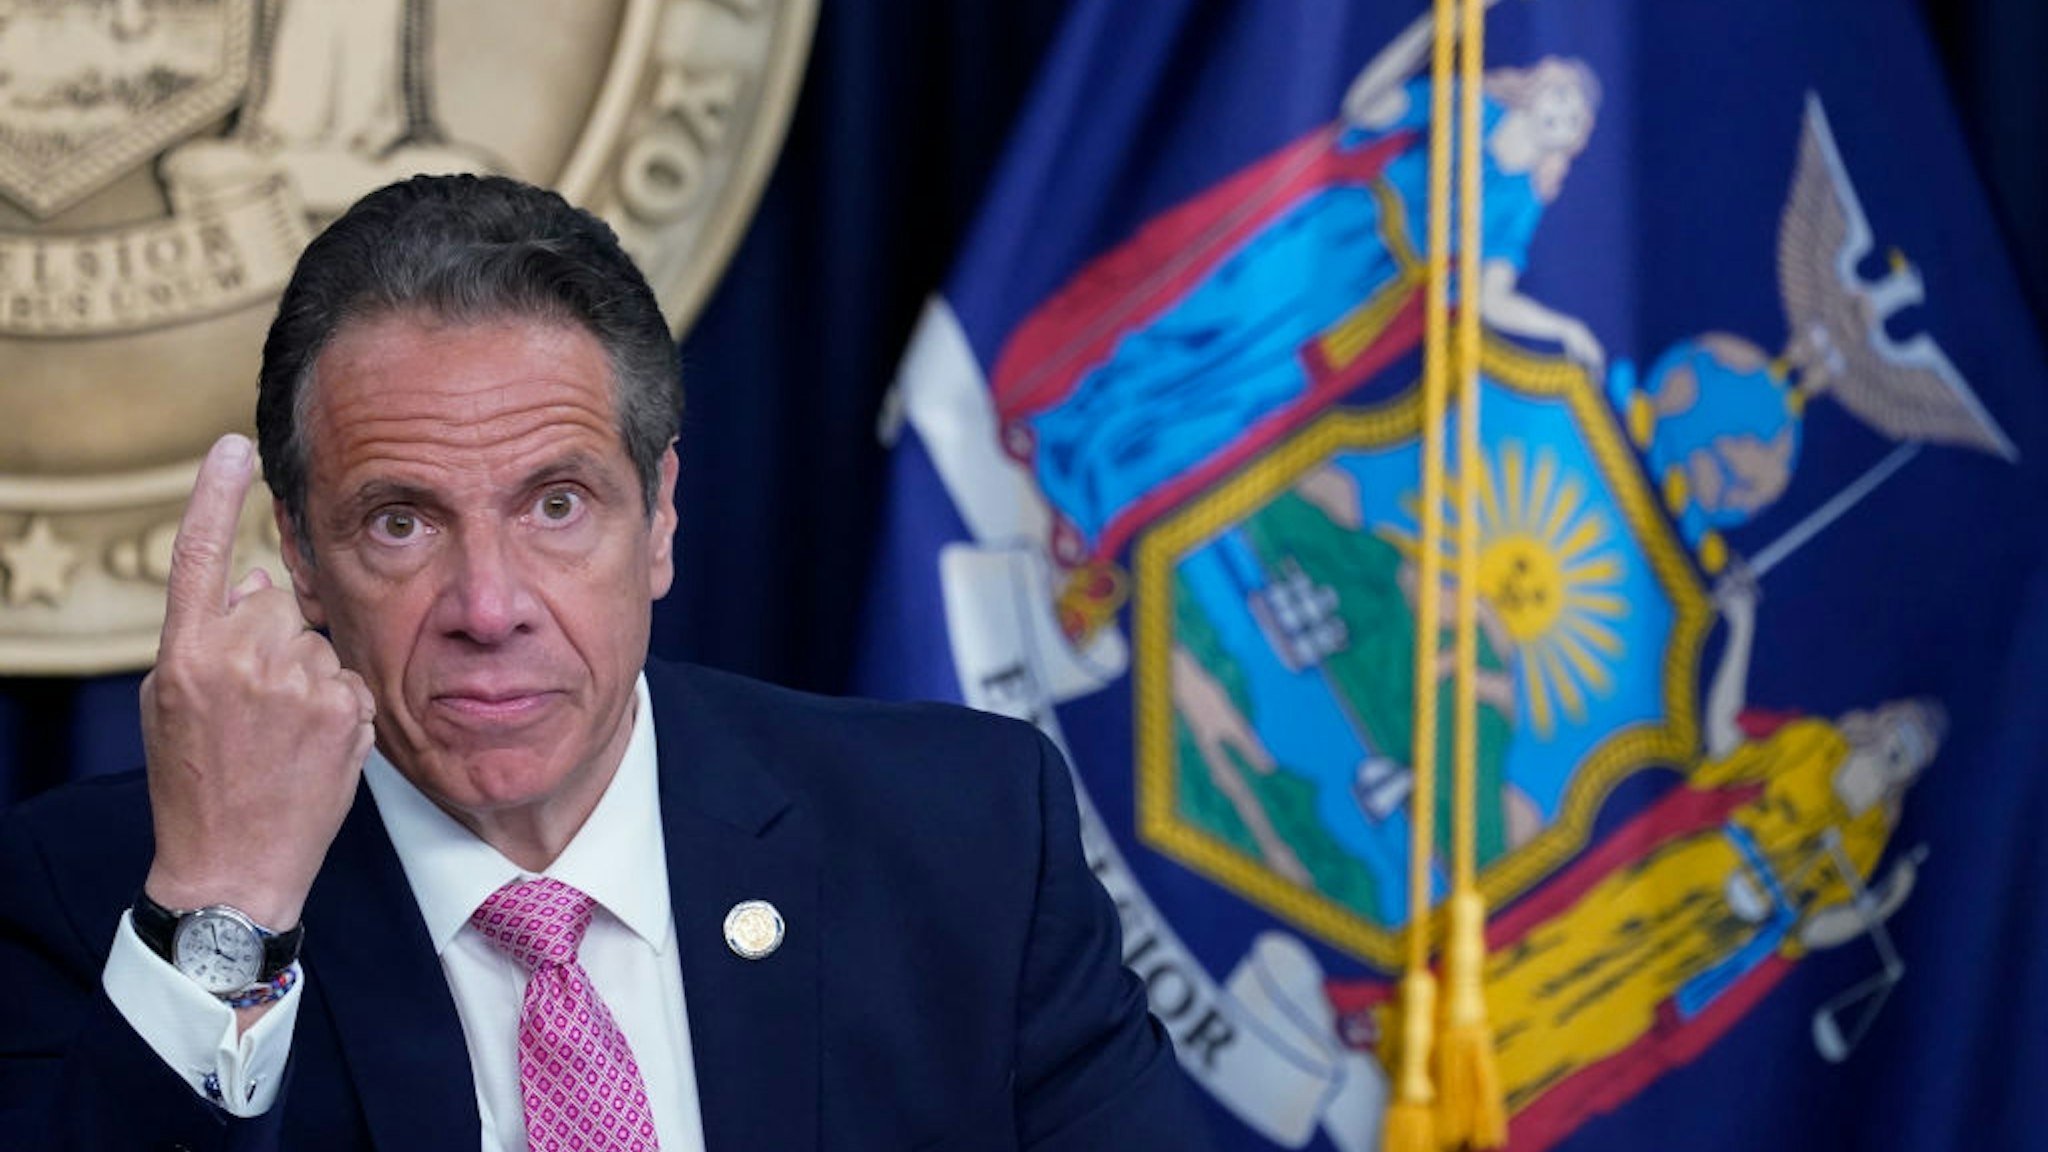 New York Gov. Andrew Cuomo speaks during a news conference on May 10, 2021 in New York City.